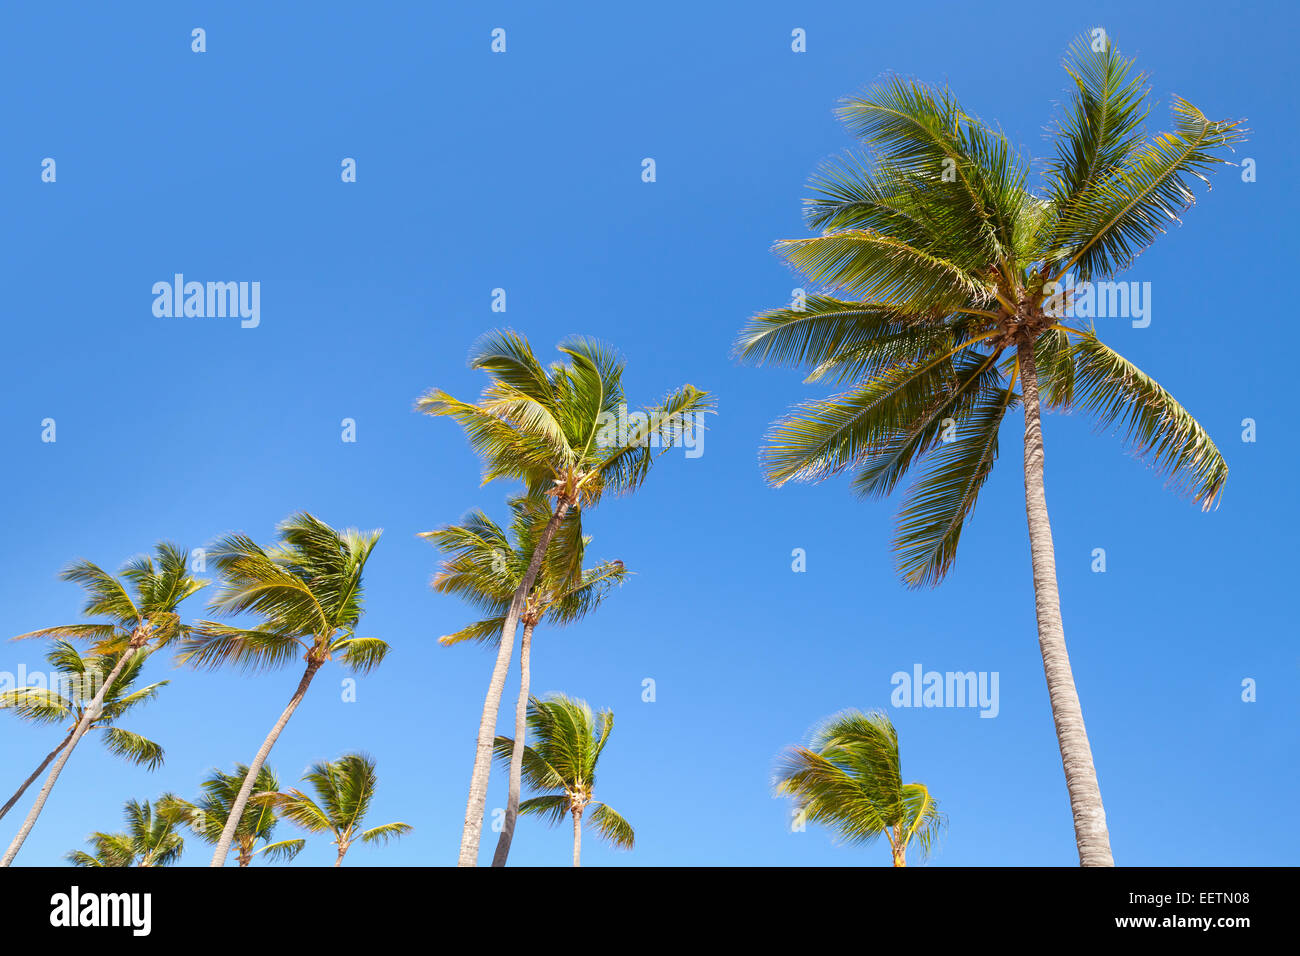 Coconut palm trees over clear blue sky background Stock Photo